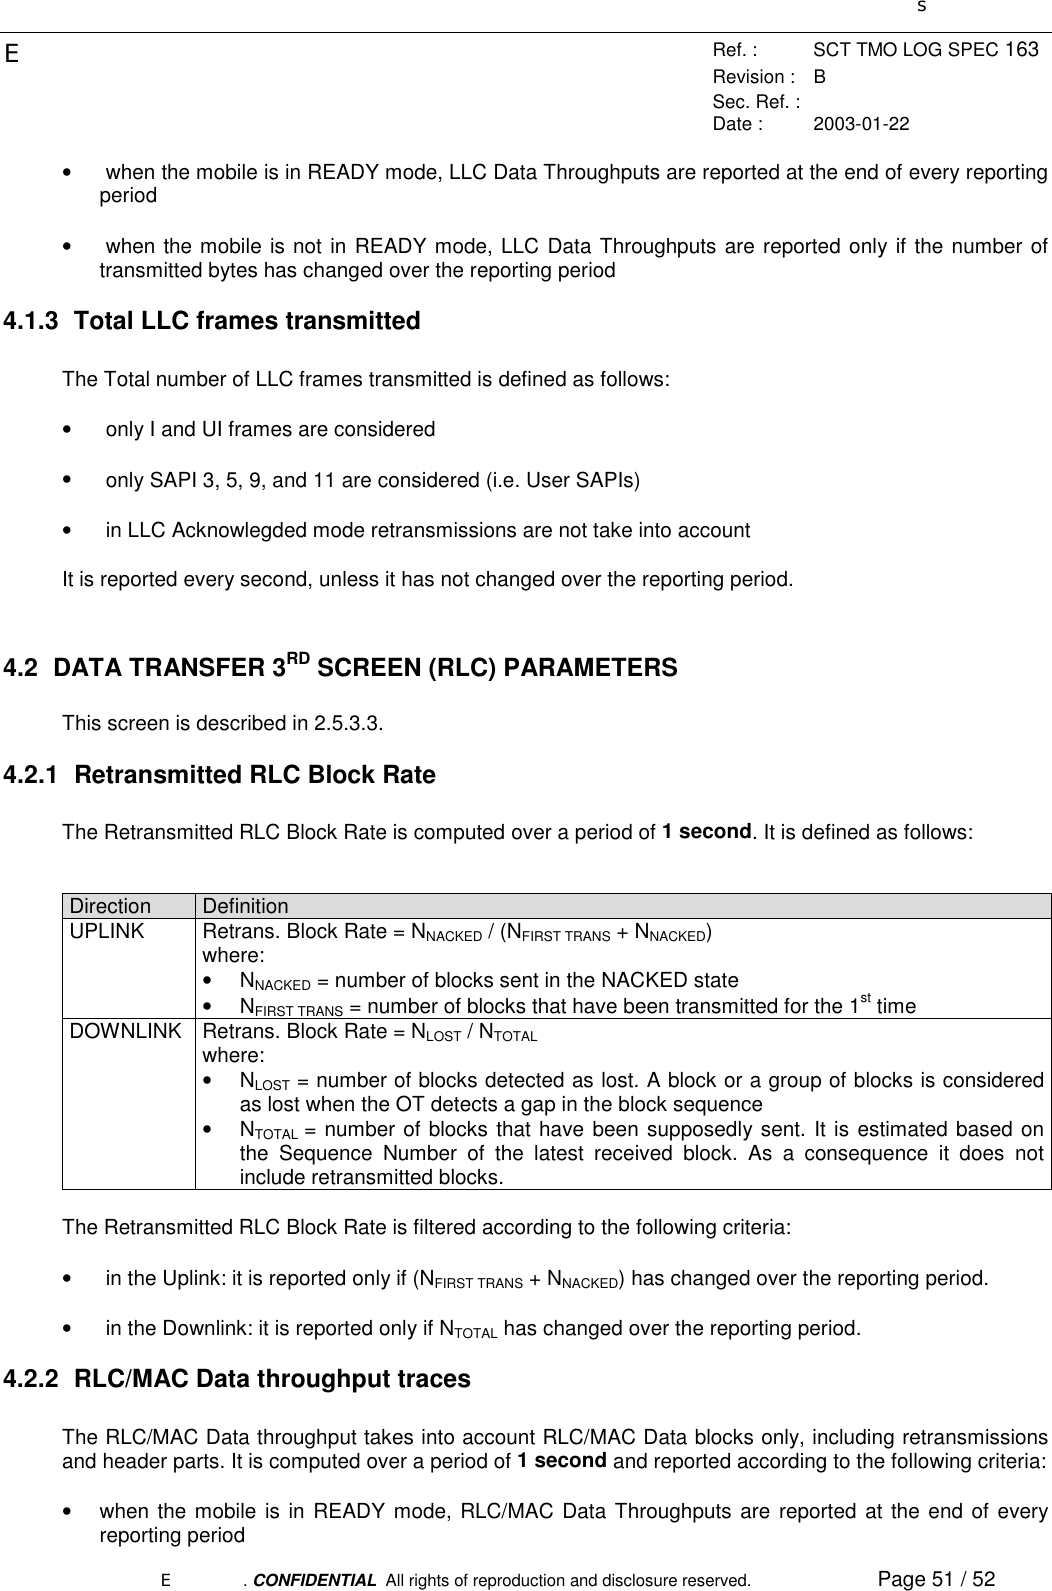 sERef. : SCT TMO LOG SPEC 163Revision : BSec. Ref. :Date : 2003-01-22E. CONFIDENTIAL  All rights of reproduction and disclosure reserved. Page 51 / 52•  when the mobile is in READY mode, LLC Data Throughputs are reported at the end of every reportingperiod•  when the mobile is not in READY mode, LLC Data Throughputs are reported only if the number oftransmitted bytes has changed over the reporting period4.1.3  Total LLC frames transmittedThe Total number of LLC frames transmitted is defined as follows:•  only I and UI frames are considered•  only SAPI 3, 5, 9, and 11 are considered (i.e. User SAPIs)•  in LLC Acknowlegded mode retransmissions are not take into accountIt is reported every second, unless it has not changed over the reporting period.4.2 DATA TRANSFER 3RD SCREEN (RLC) PARAMETERSThis screen is described in 2.5.3.3.4.2.1  Retransmitted RLC Block RateThe Retransmitted RLC Block Rate is computed over a period of 1 second. It is defined as follows:Direction DefinitionUPLINK Retrans. Block Rate = NNACKED / (NFIRST TRANS + NNACKED)where:• NNACKED = number of blocks sent in the NACKED state• NFIRST TRANS = number of blocks that have been transmitted for the 1st timeDOWNLINK Retrans. Block Rate = NLOST / NTOTALwhere:• NLOST = number of blocks detected as lost. A block or a group of blocks is consideredas lost when the OT detects a gap in the block sequence• NTOTAL  = number of blocks that have been supposedly sent. It is estimated based onthe Sequence Number of the latest received block. As a consequence it does notinclude retransmitted blocks.The Retransmitted RLC Block Rate is filtered according to the following criteria:•  in the Uplink: it is reported only if (NFIRST TRANS + NNACKED) has changed over the reporting period.•  in the Downlink: it is reported only if NTOTAL has changed over the reporting period.4.2.2  RLC/MAC Data throughput tracesThe RLC/MAC Data throughput takes into account RLC/MAC Data blocks only, including retransmissionsand header parts. It is computed over a period of 1 second and reported according to the following criteria:•  when the mobile is in READY mode, RLC/MAC Data Throughputs are reported at the end of everyreporting period